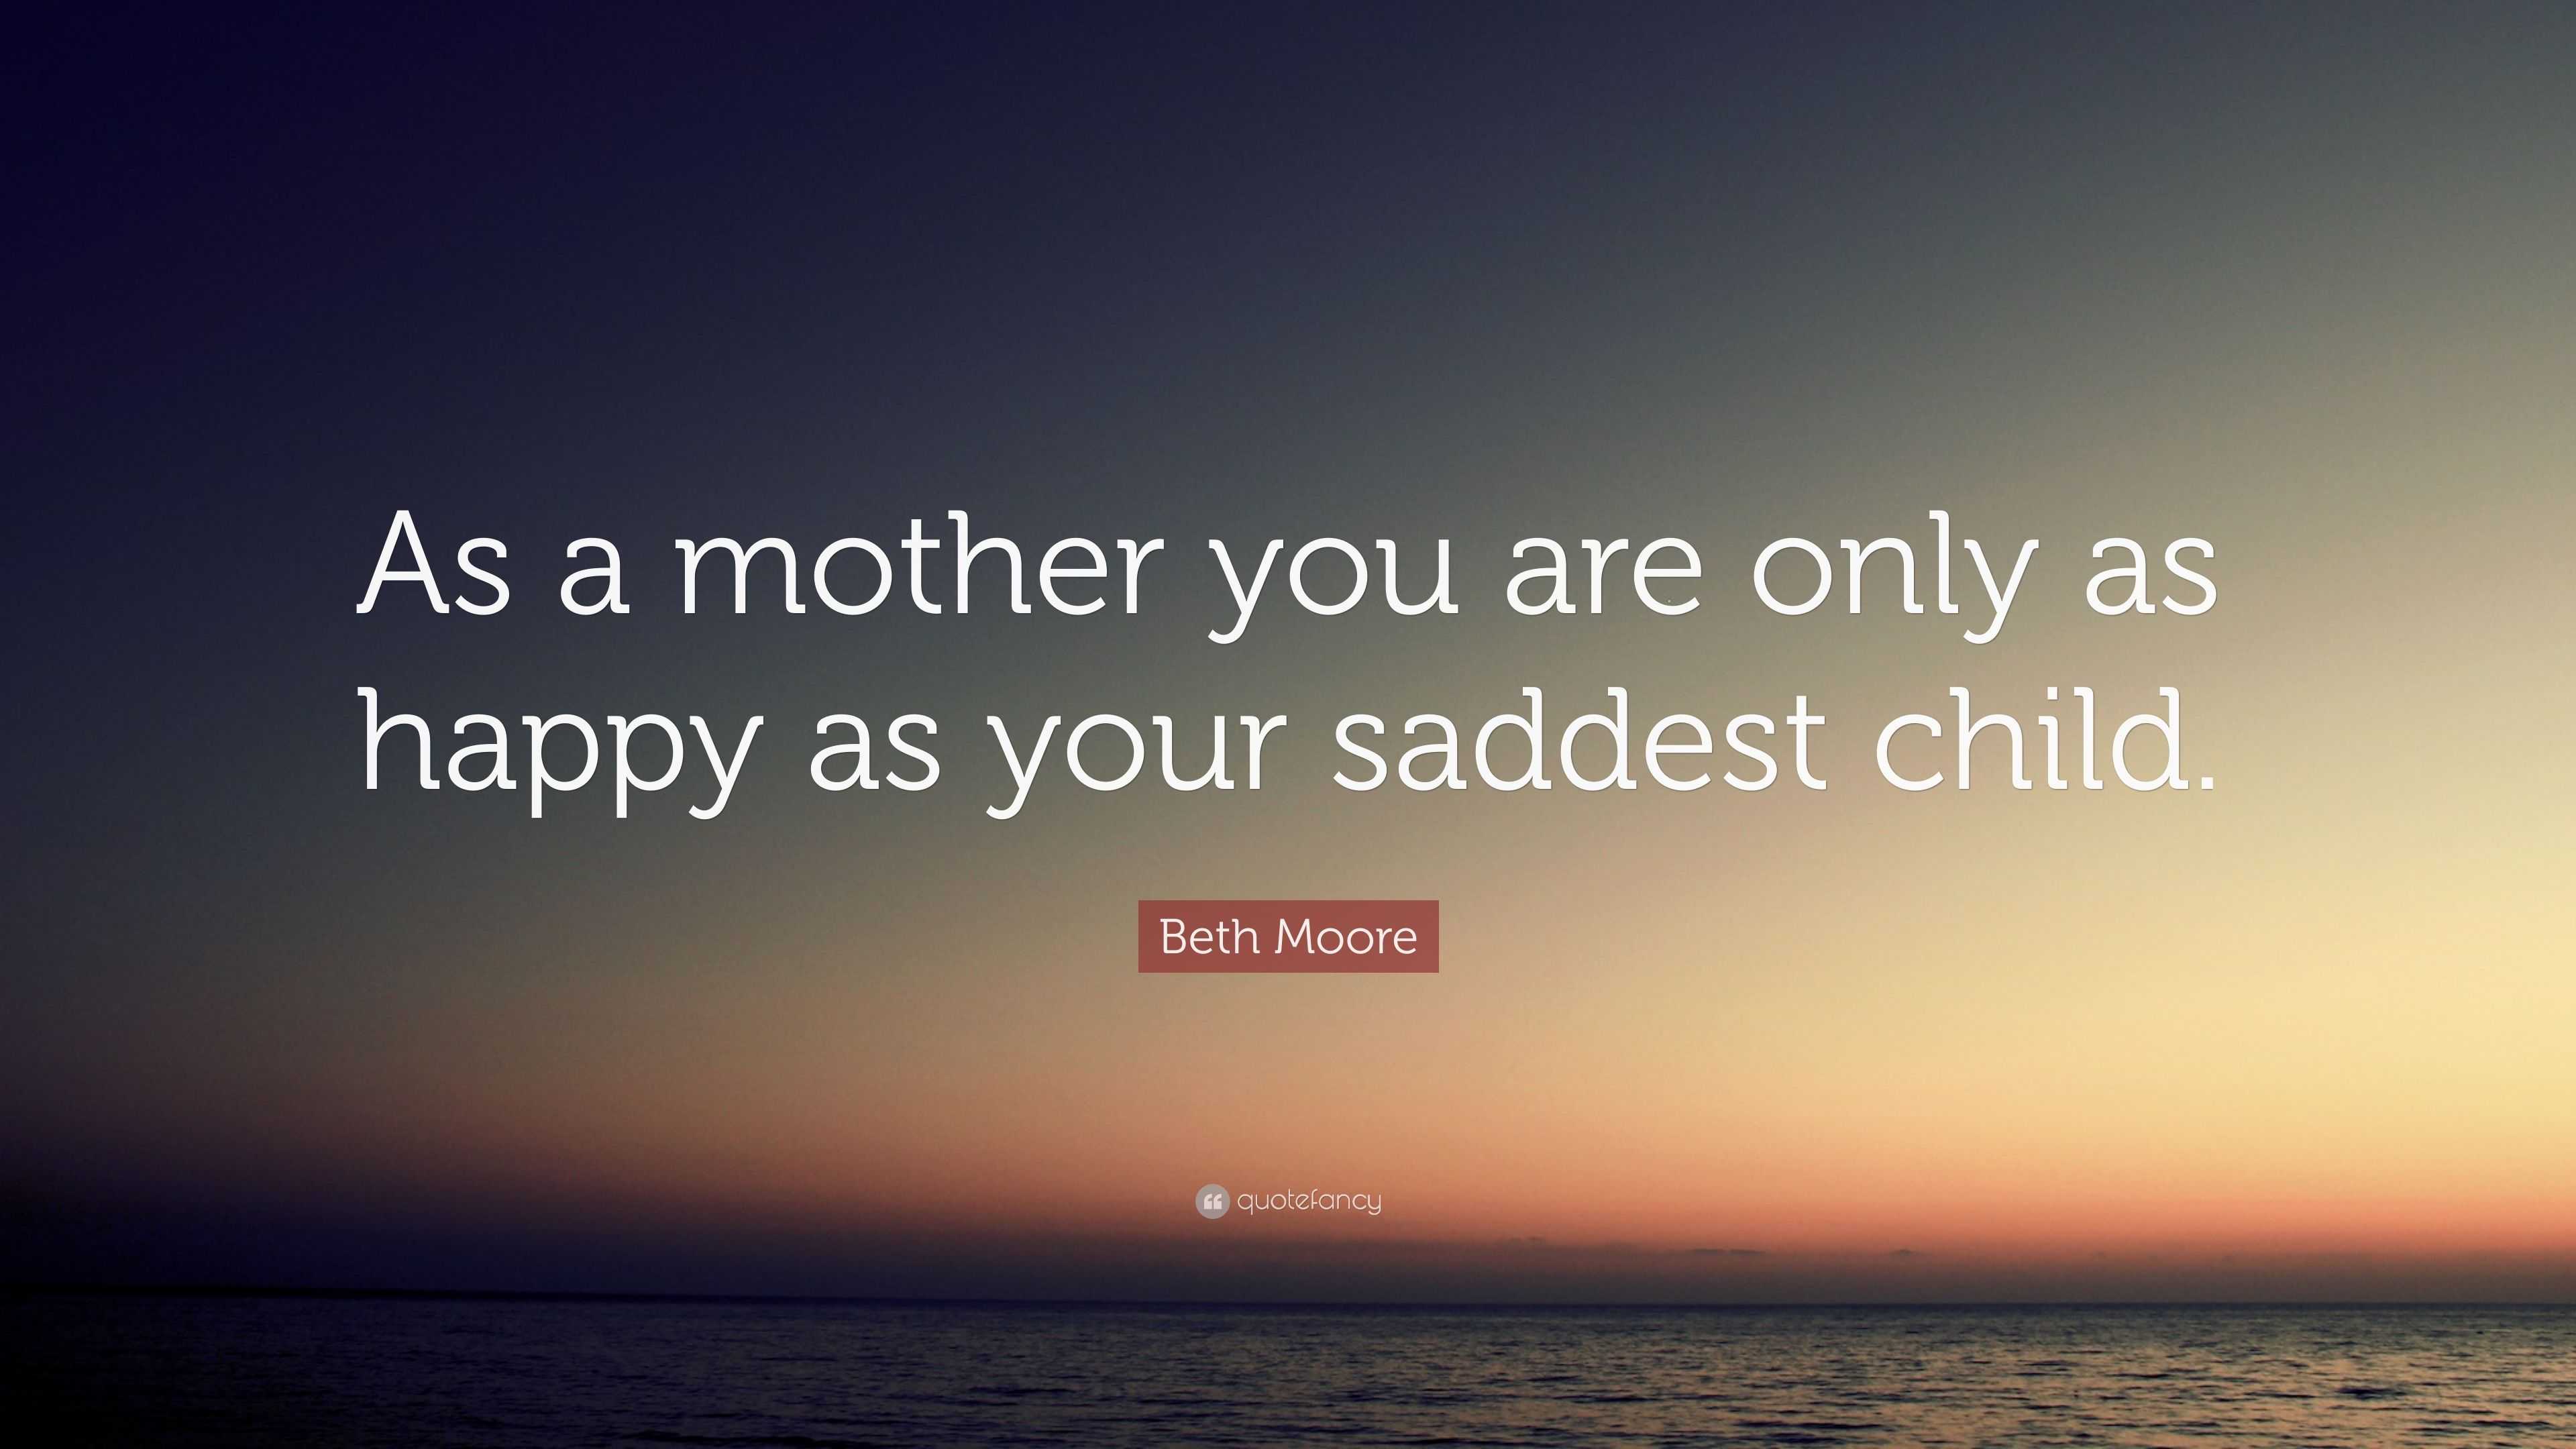 Beth Moore Quote: “As a mother you are only as happy as your saddest ...